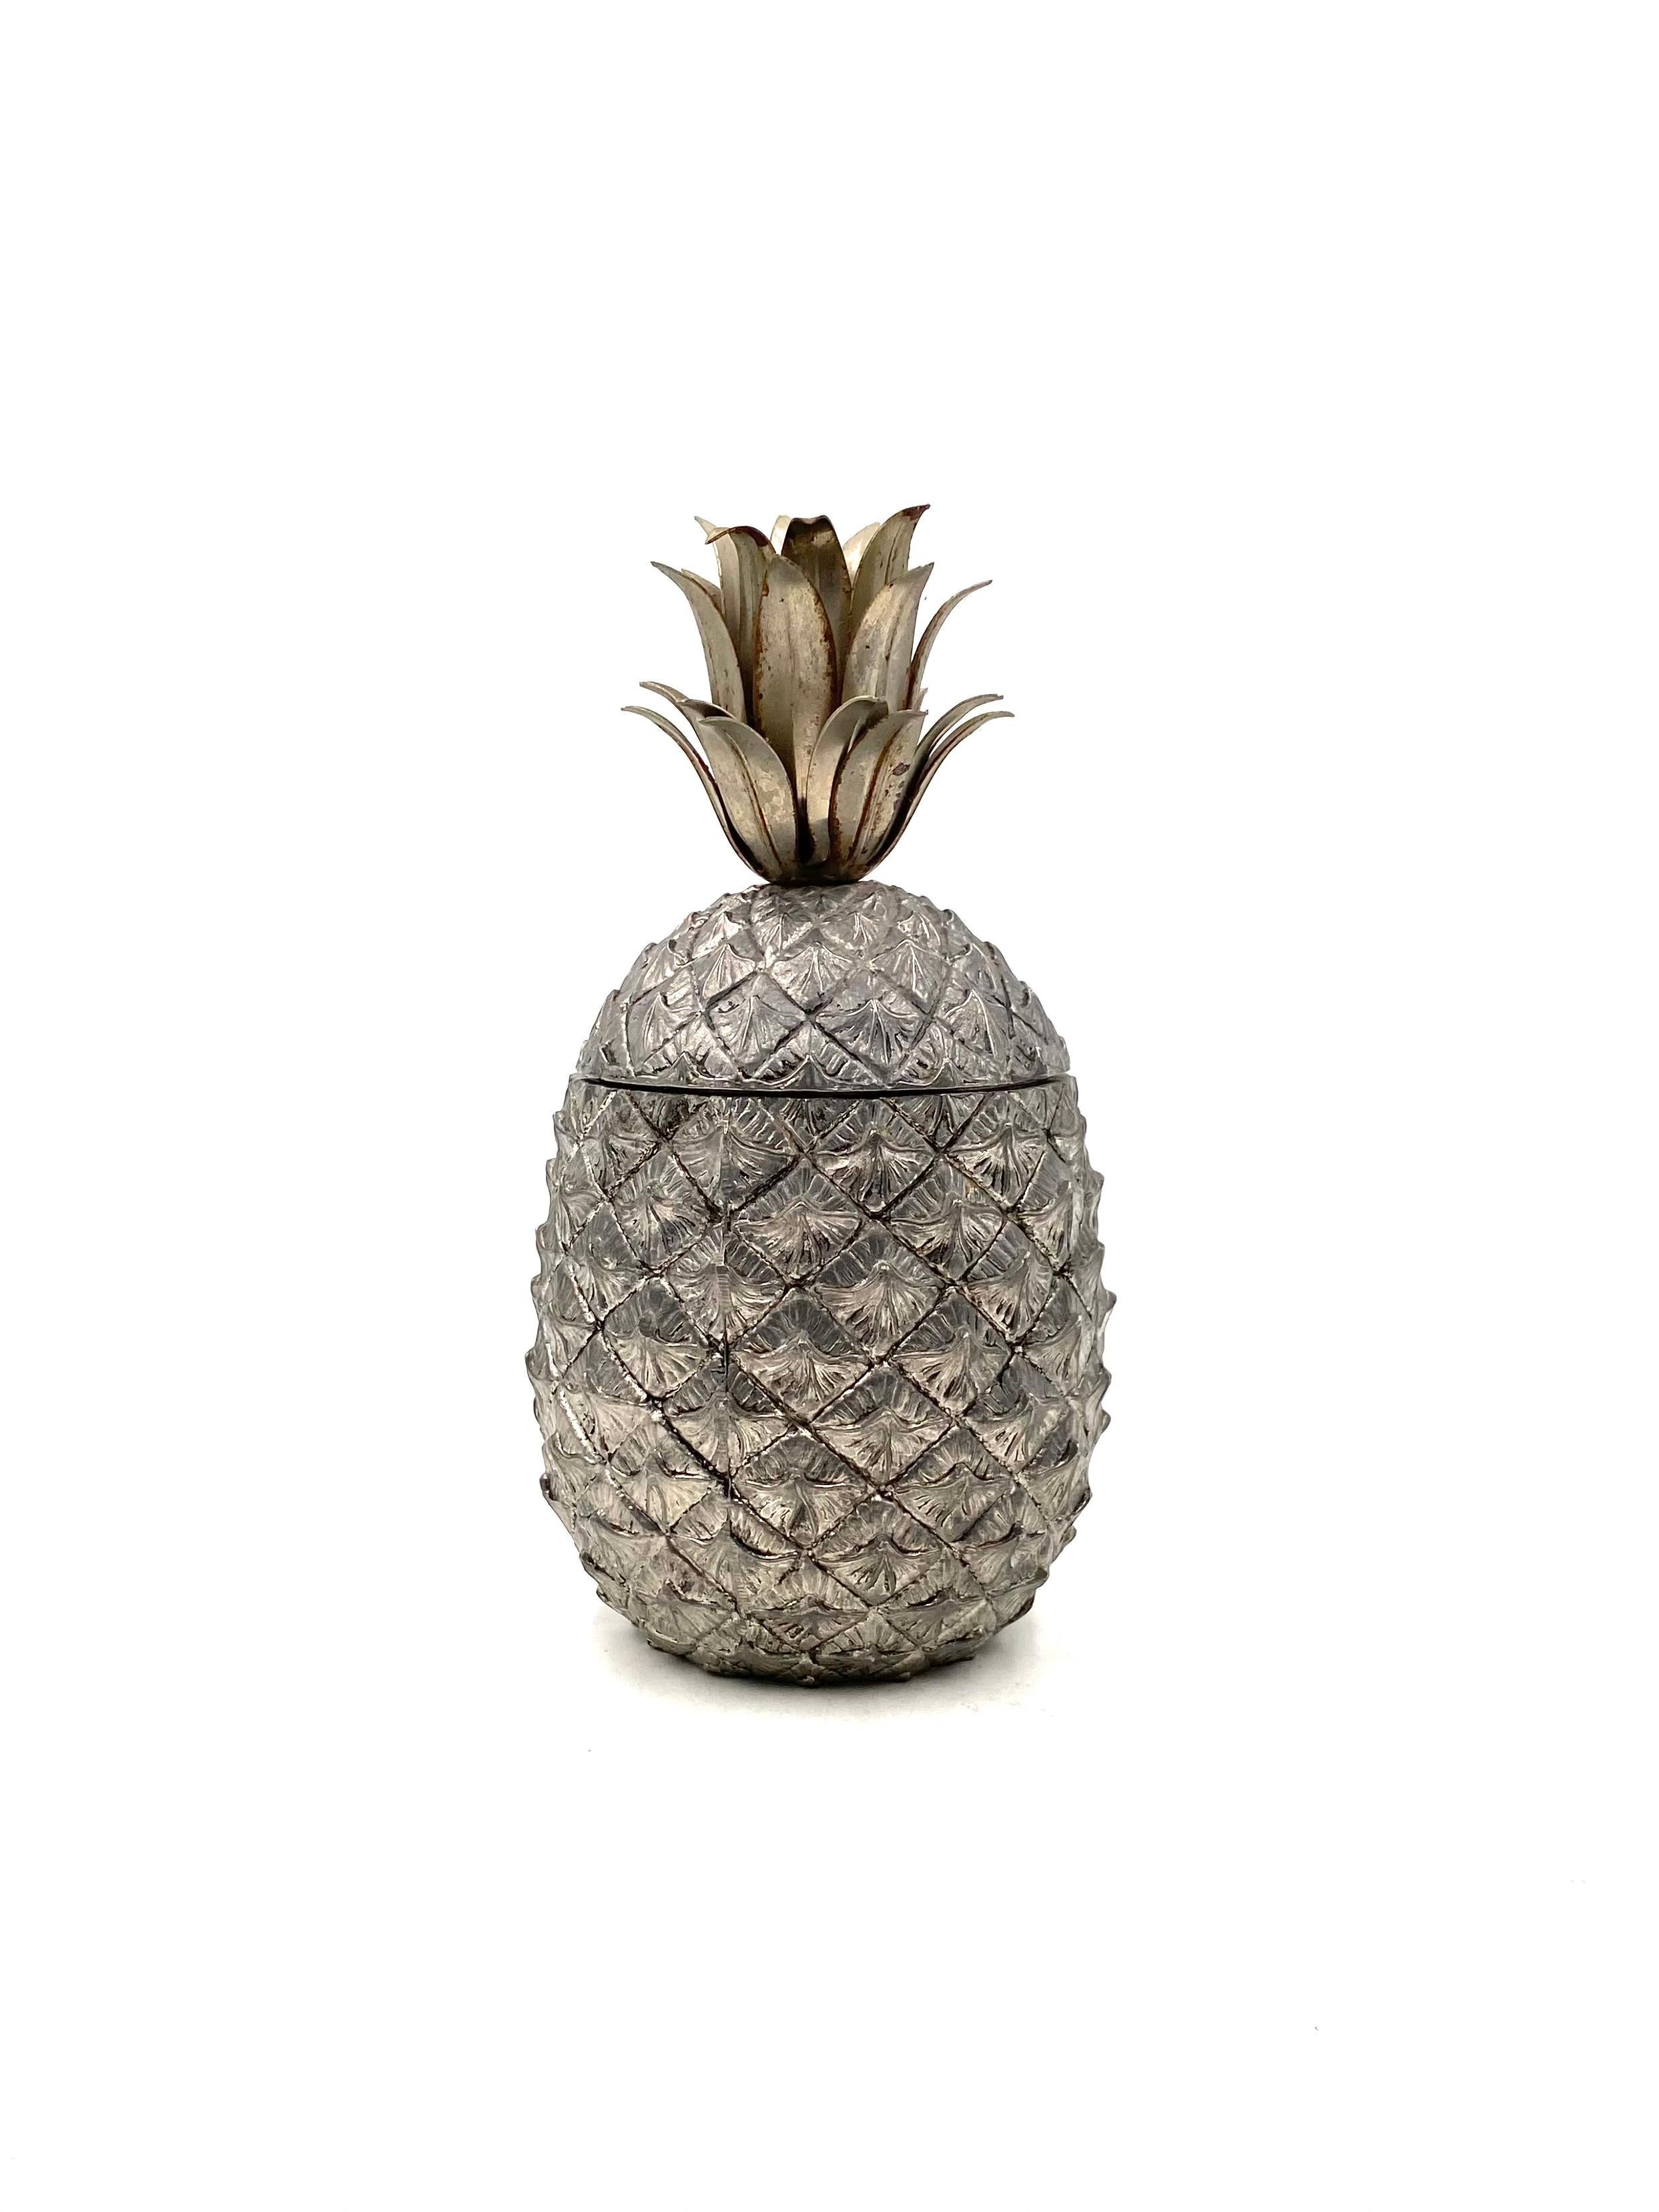 Silvered Pineapple Ice Bucket, Mauro Manetti Fonderie d'Arte, Italy 1970s 4